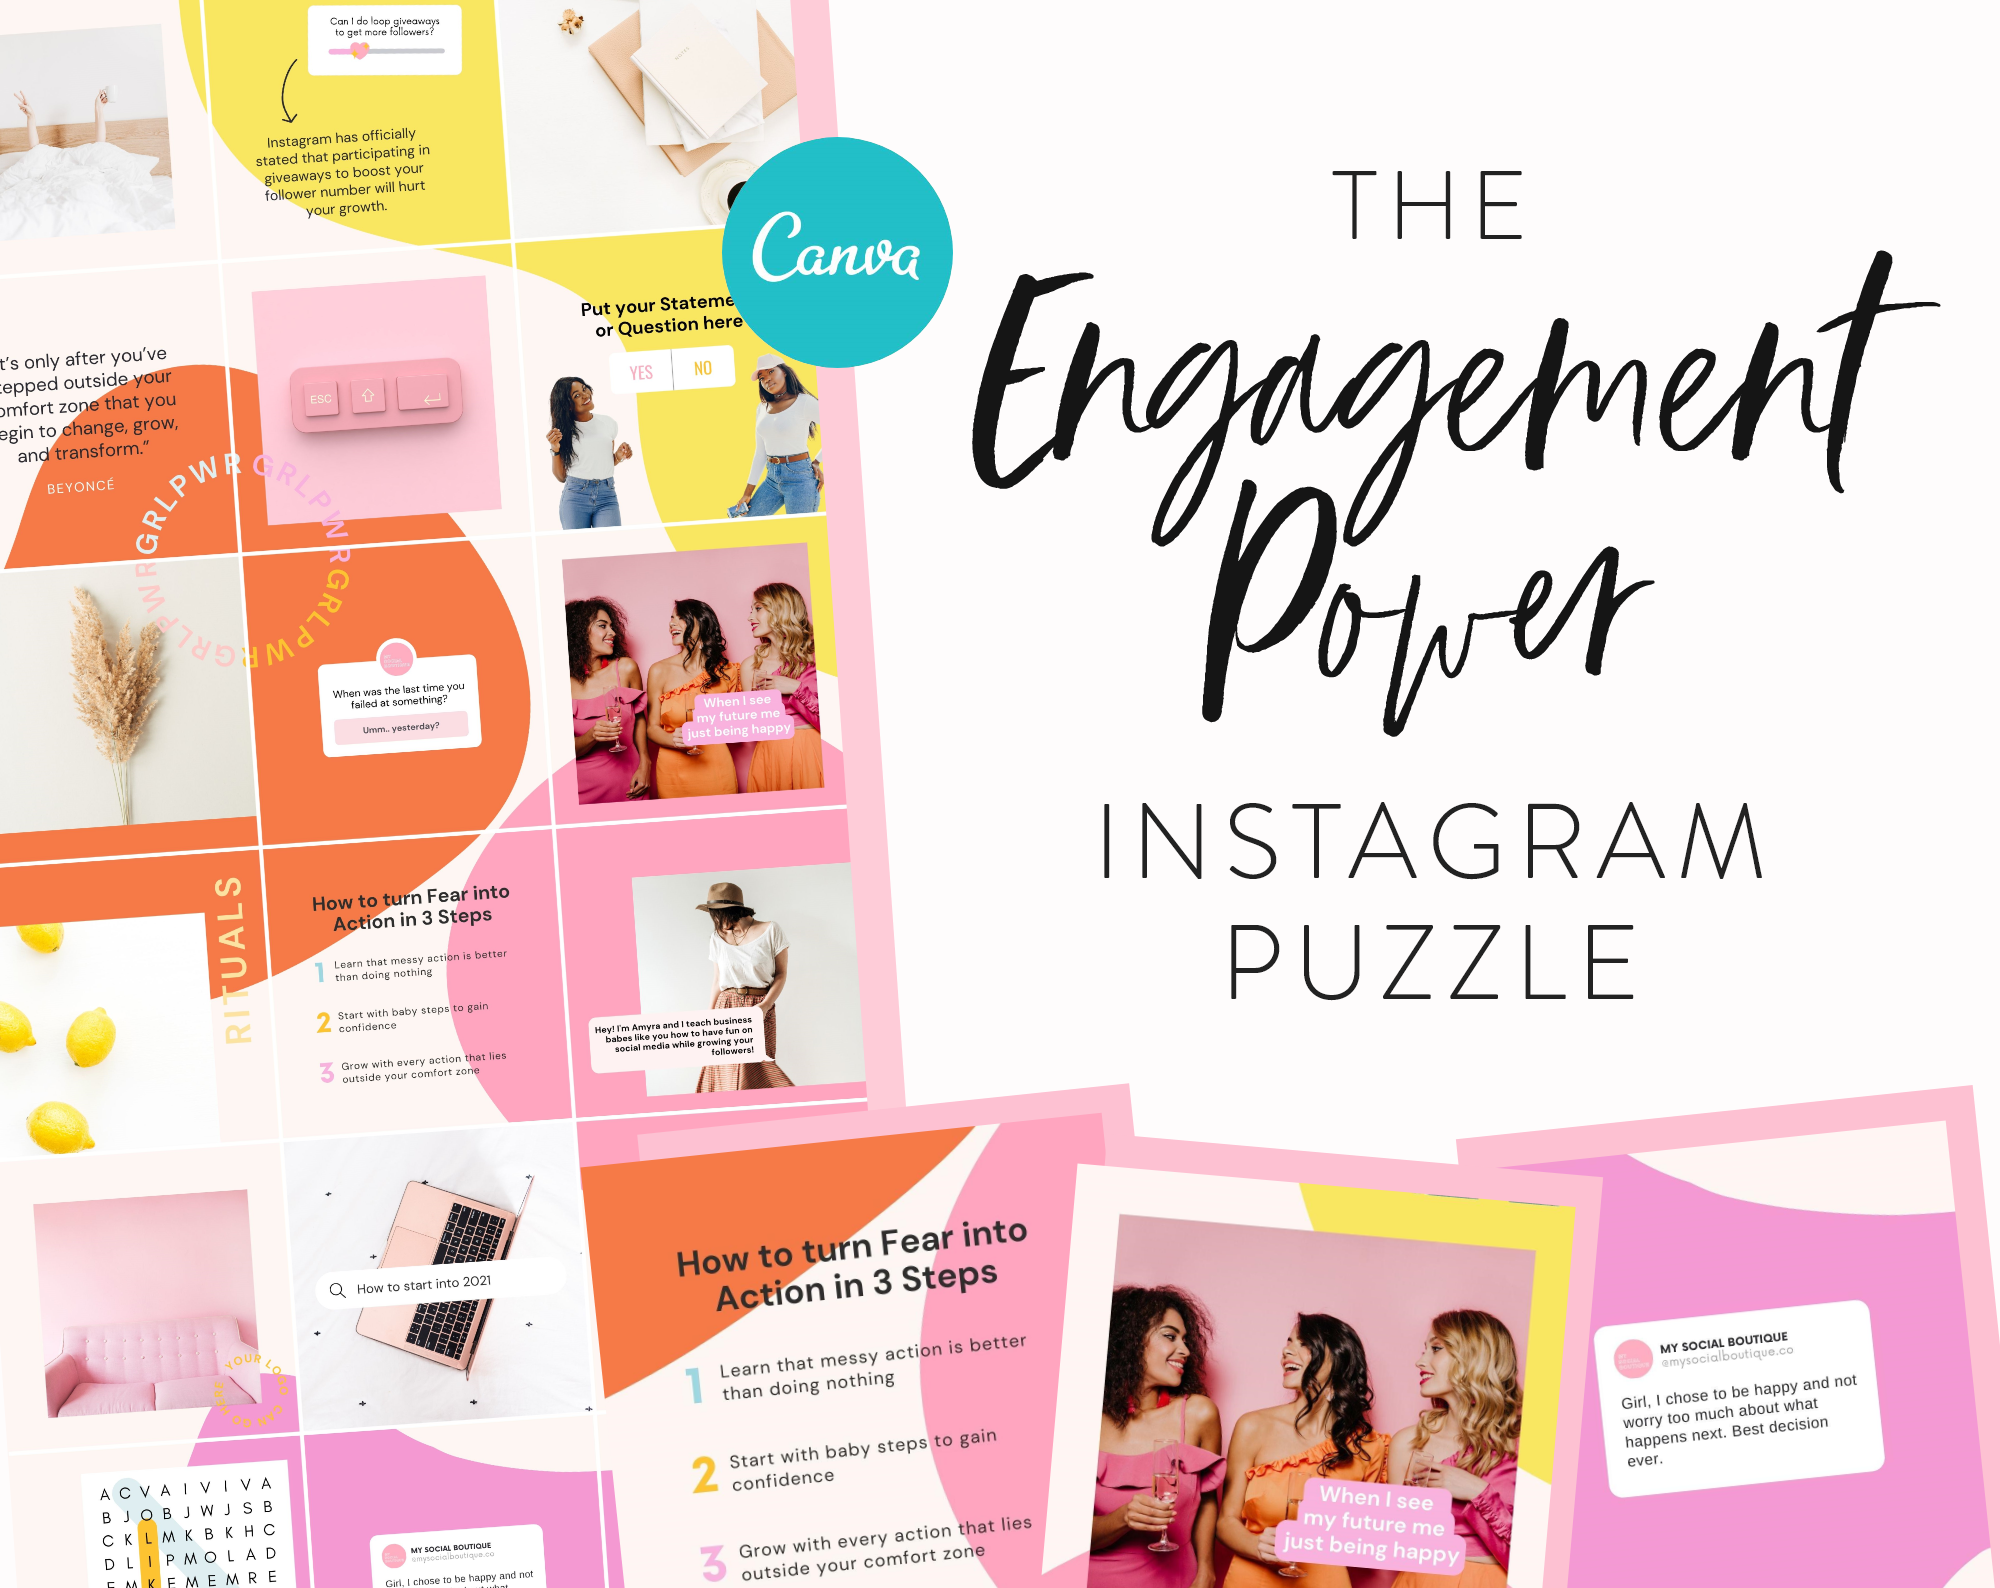 Engagement-power-Instagram-puzzle-for-canva-templates